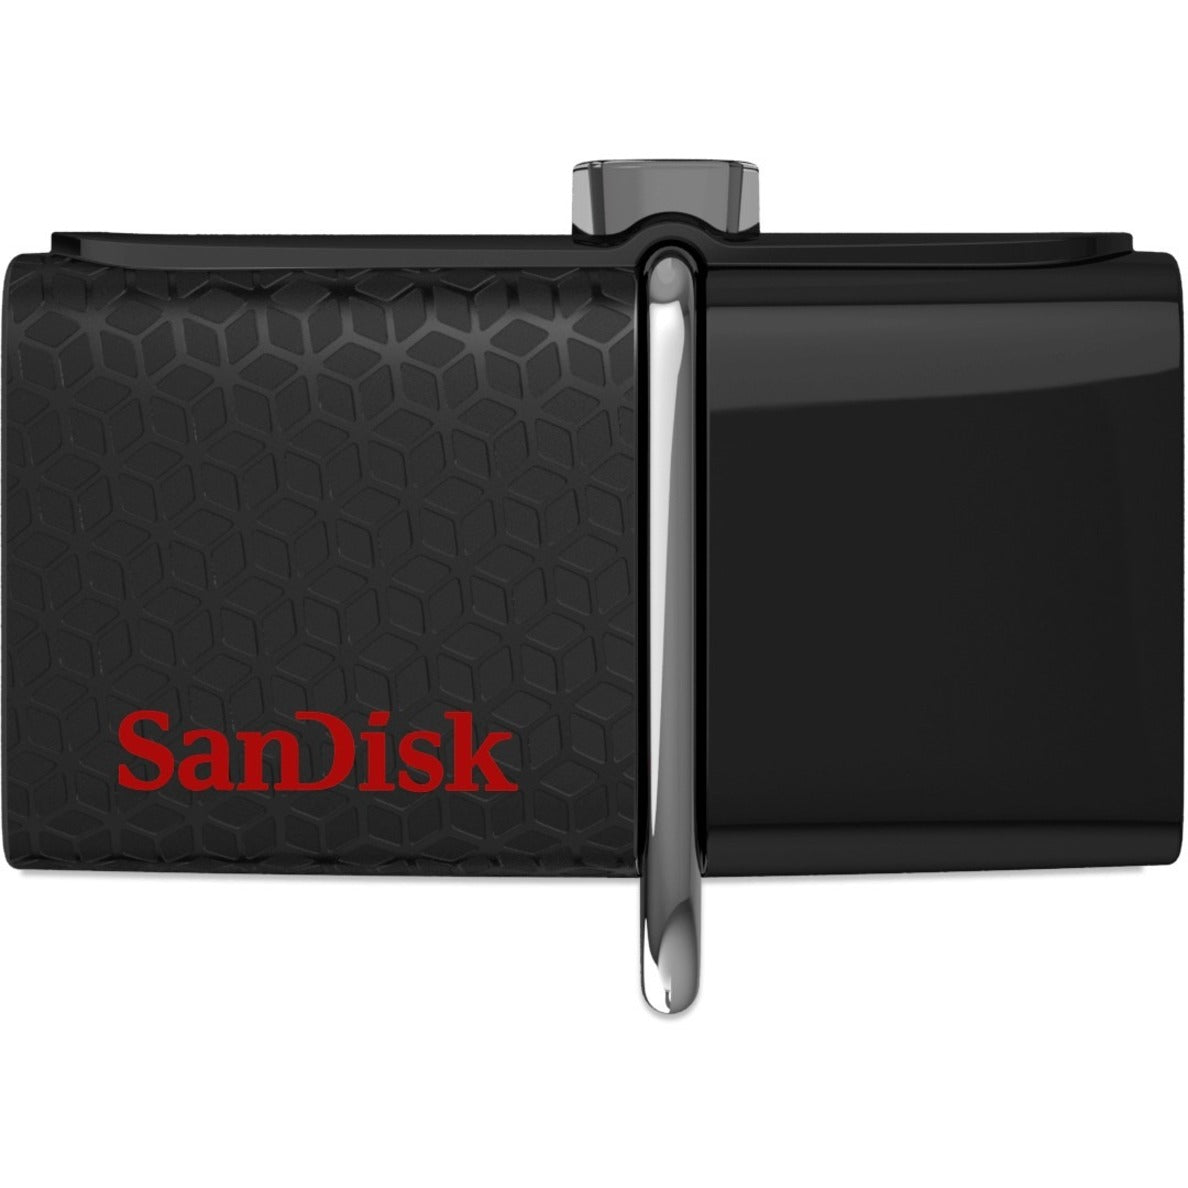 SanDisk SDDD2-064G-A46 Ultra Dual USB Drive 3.0 - 64GB, High-Speed Data Transfer and Easy File Sharing